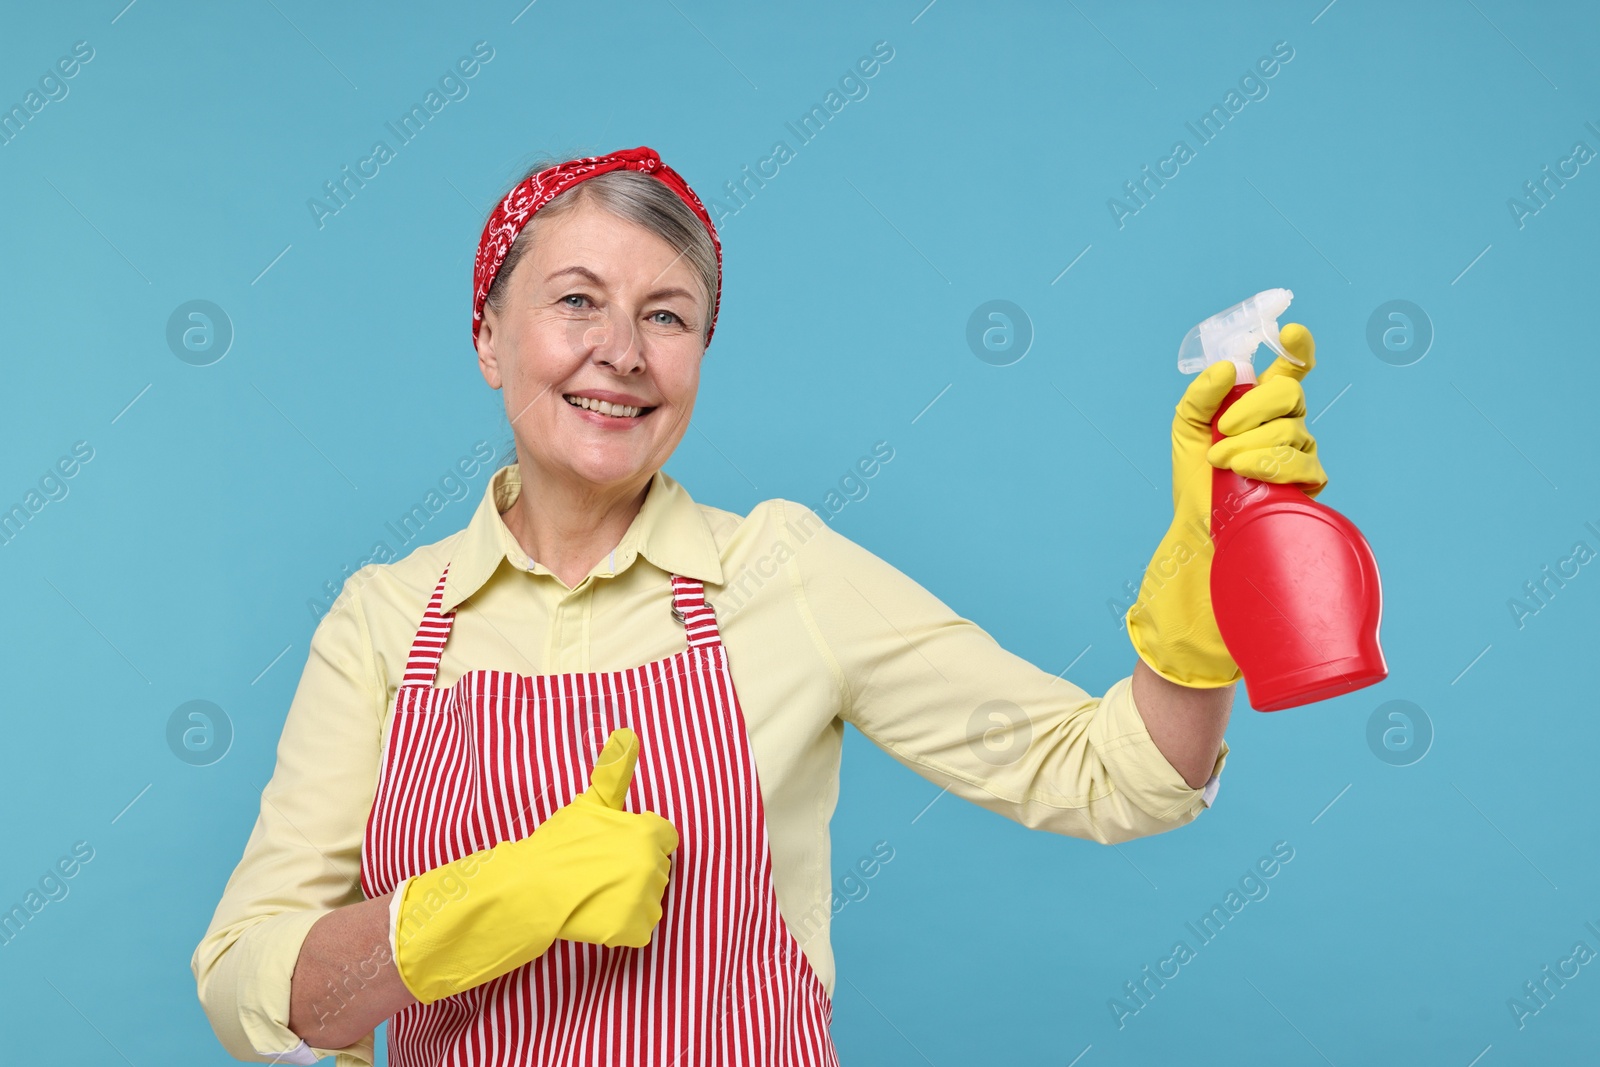 Photo of Happy housewife with spray bottle showing thumbs up on light blue background